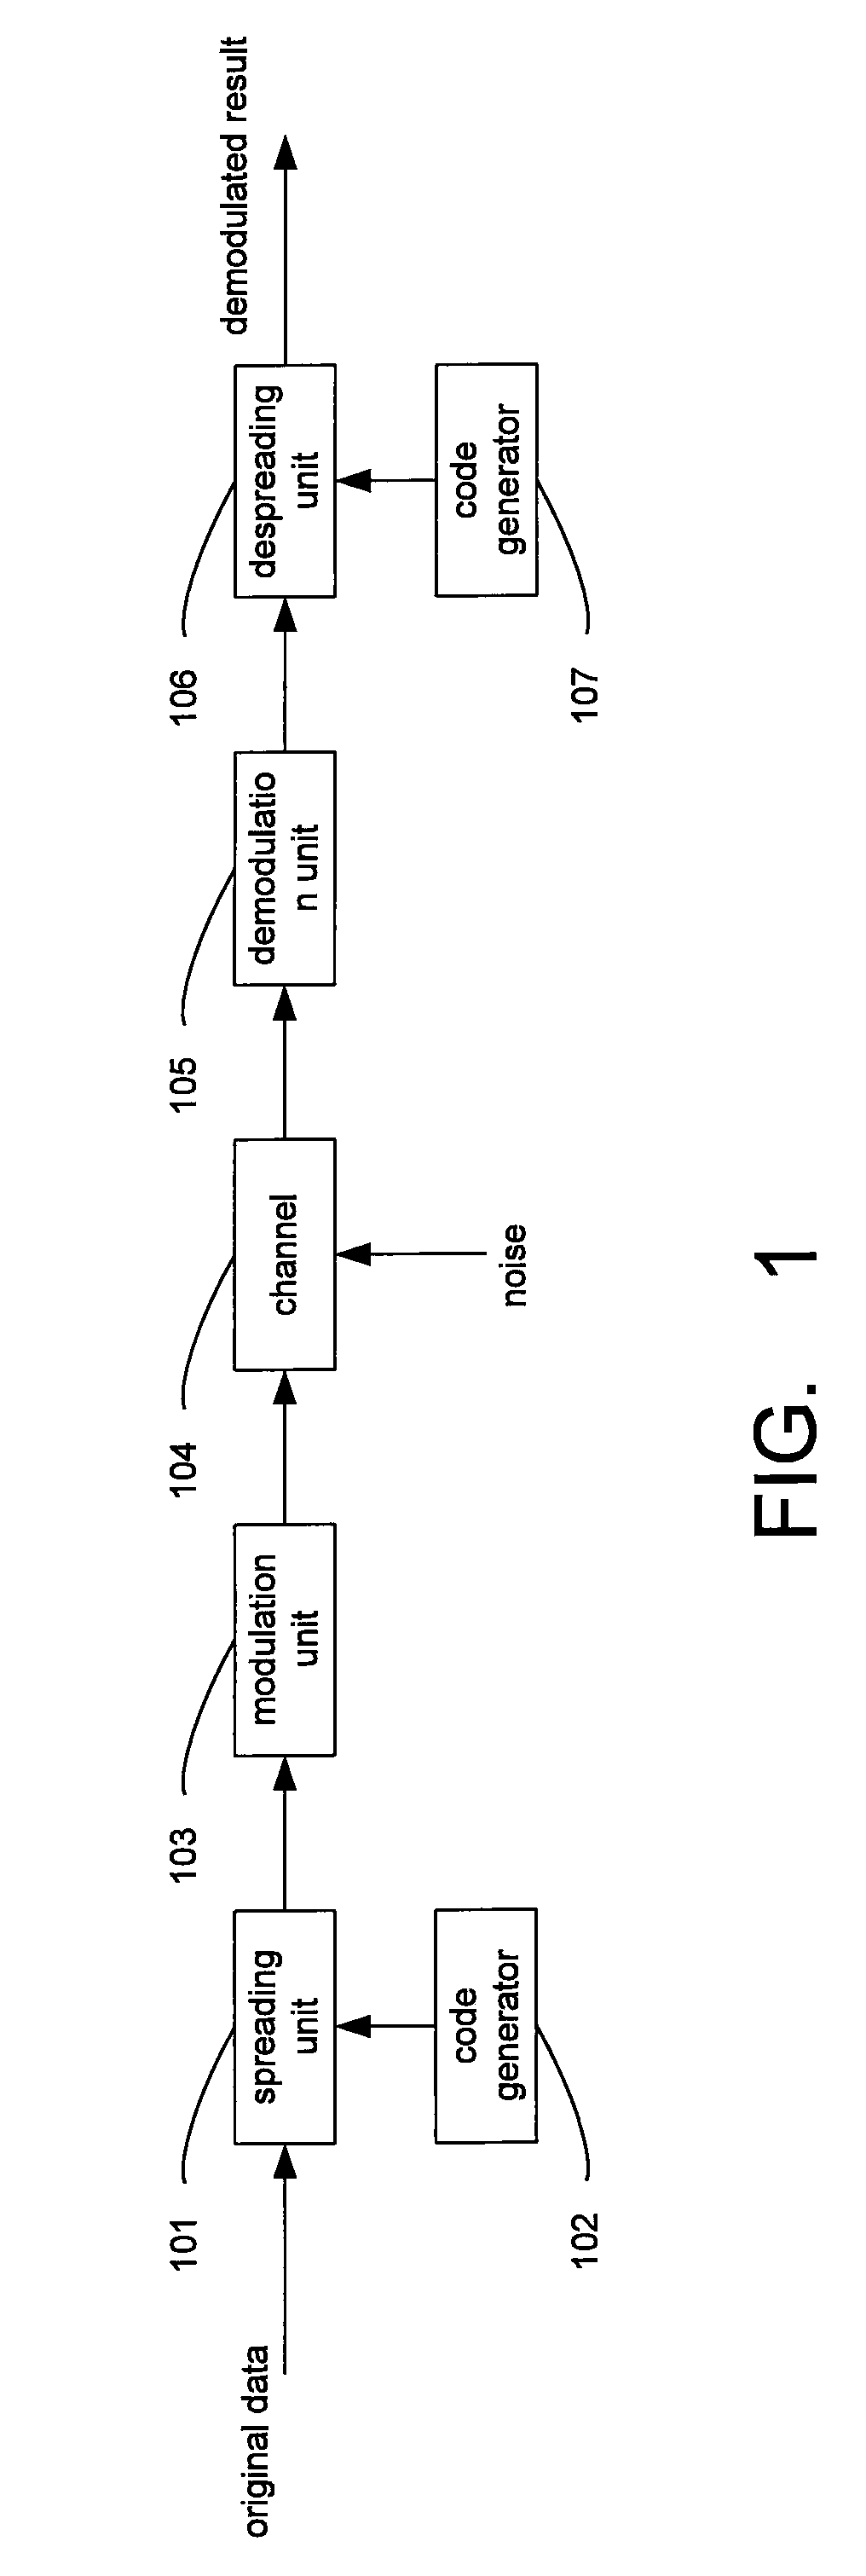 Methods and apparatus for spread spectrum modulation and demodulation